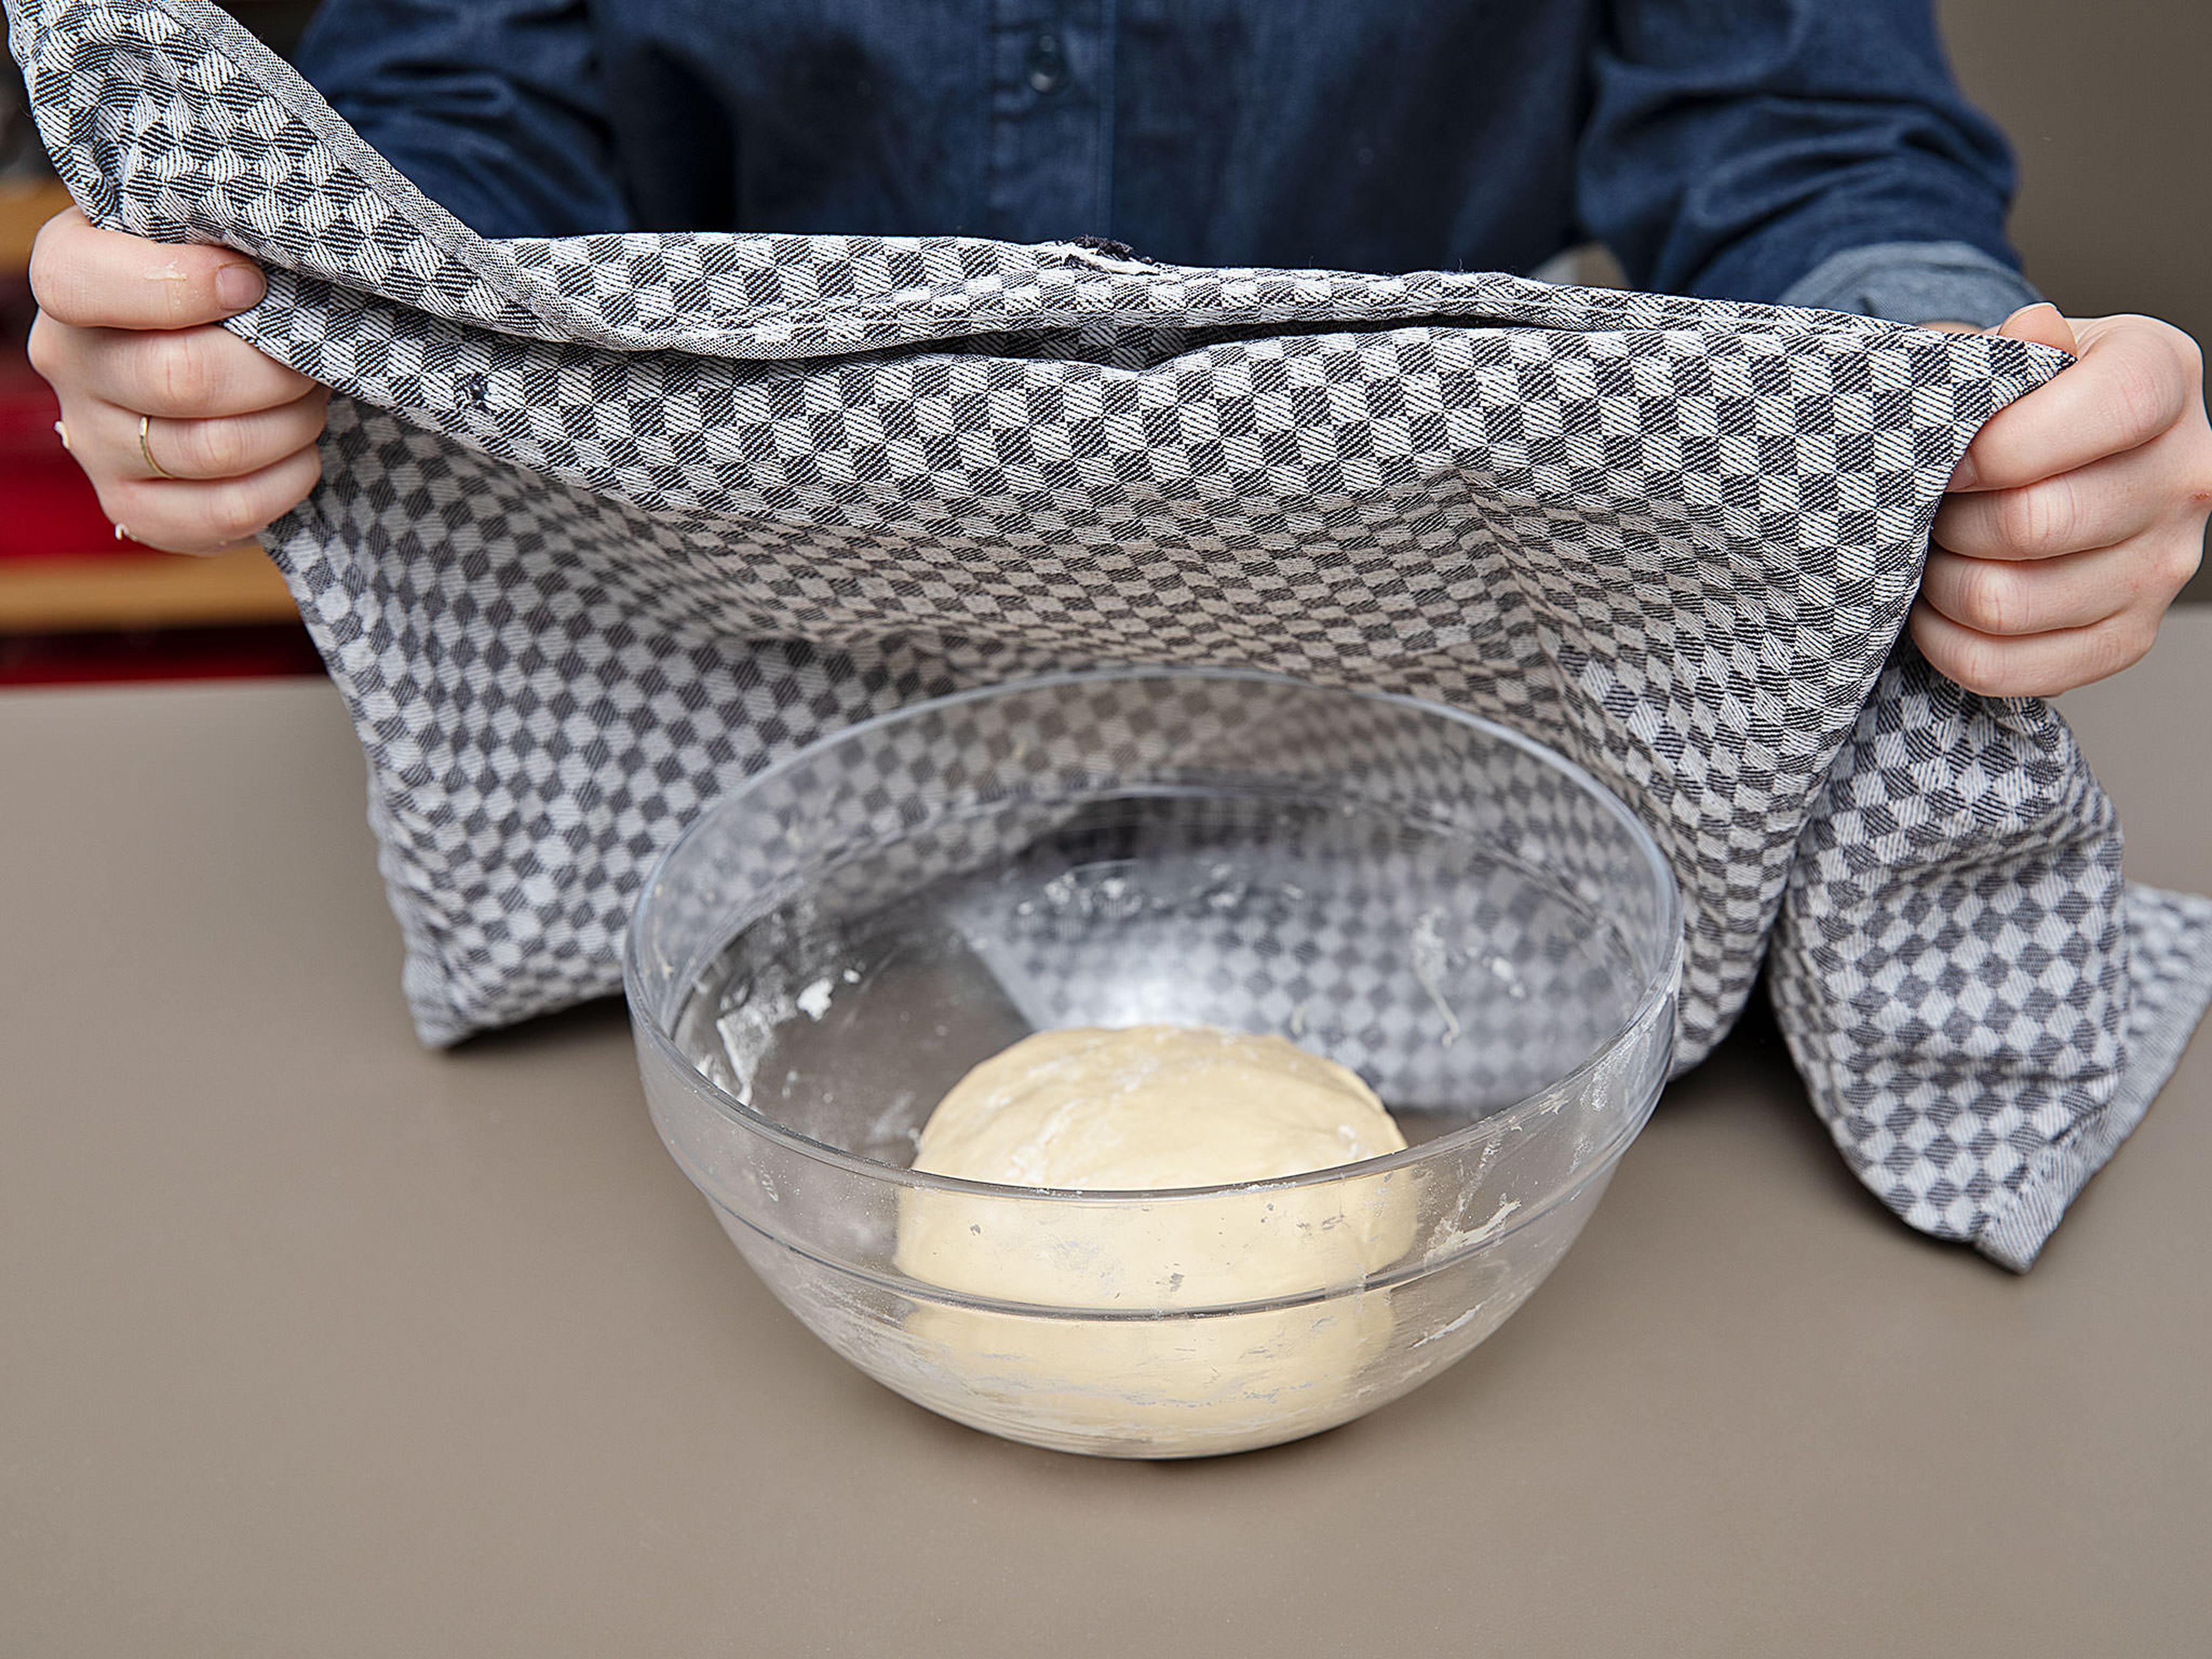 Dust the dough ball with flour and cover the bowl with a kitchen towel. Leave in a warm place to rise for approx. 2 – 4 hrs., the longer the better as it will develop flavour and the fluffiest texture.